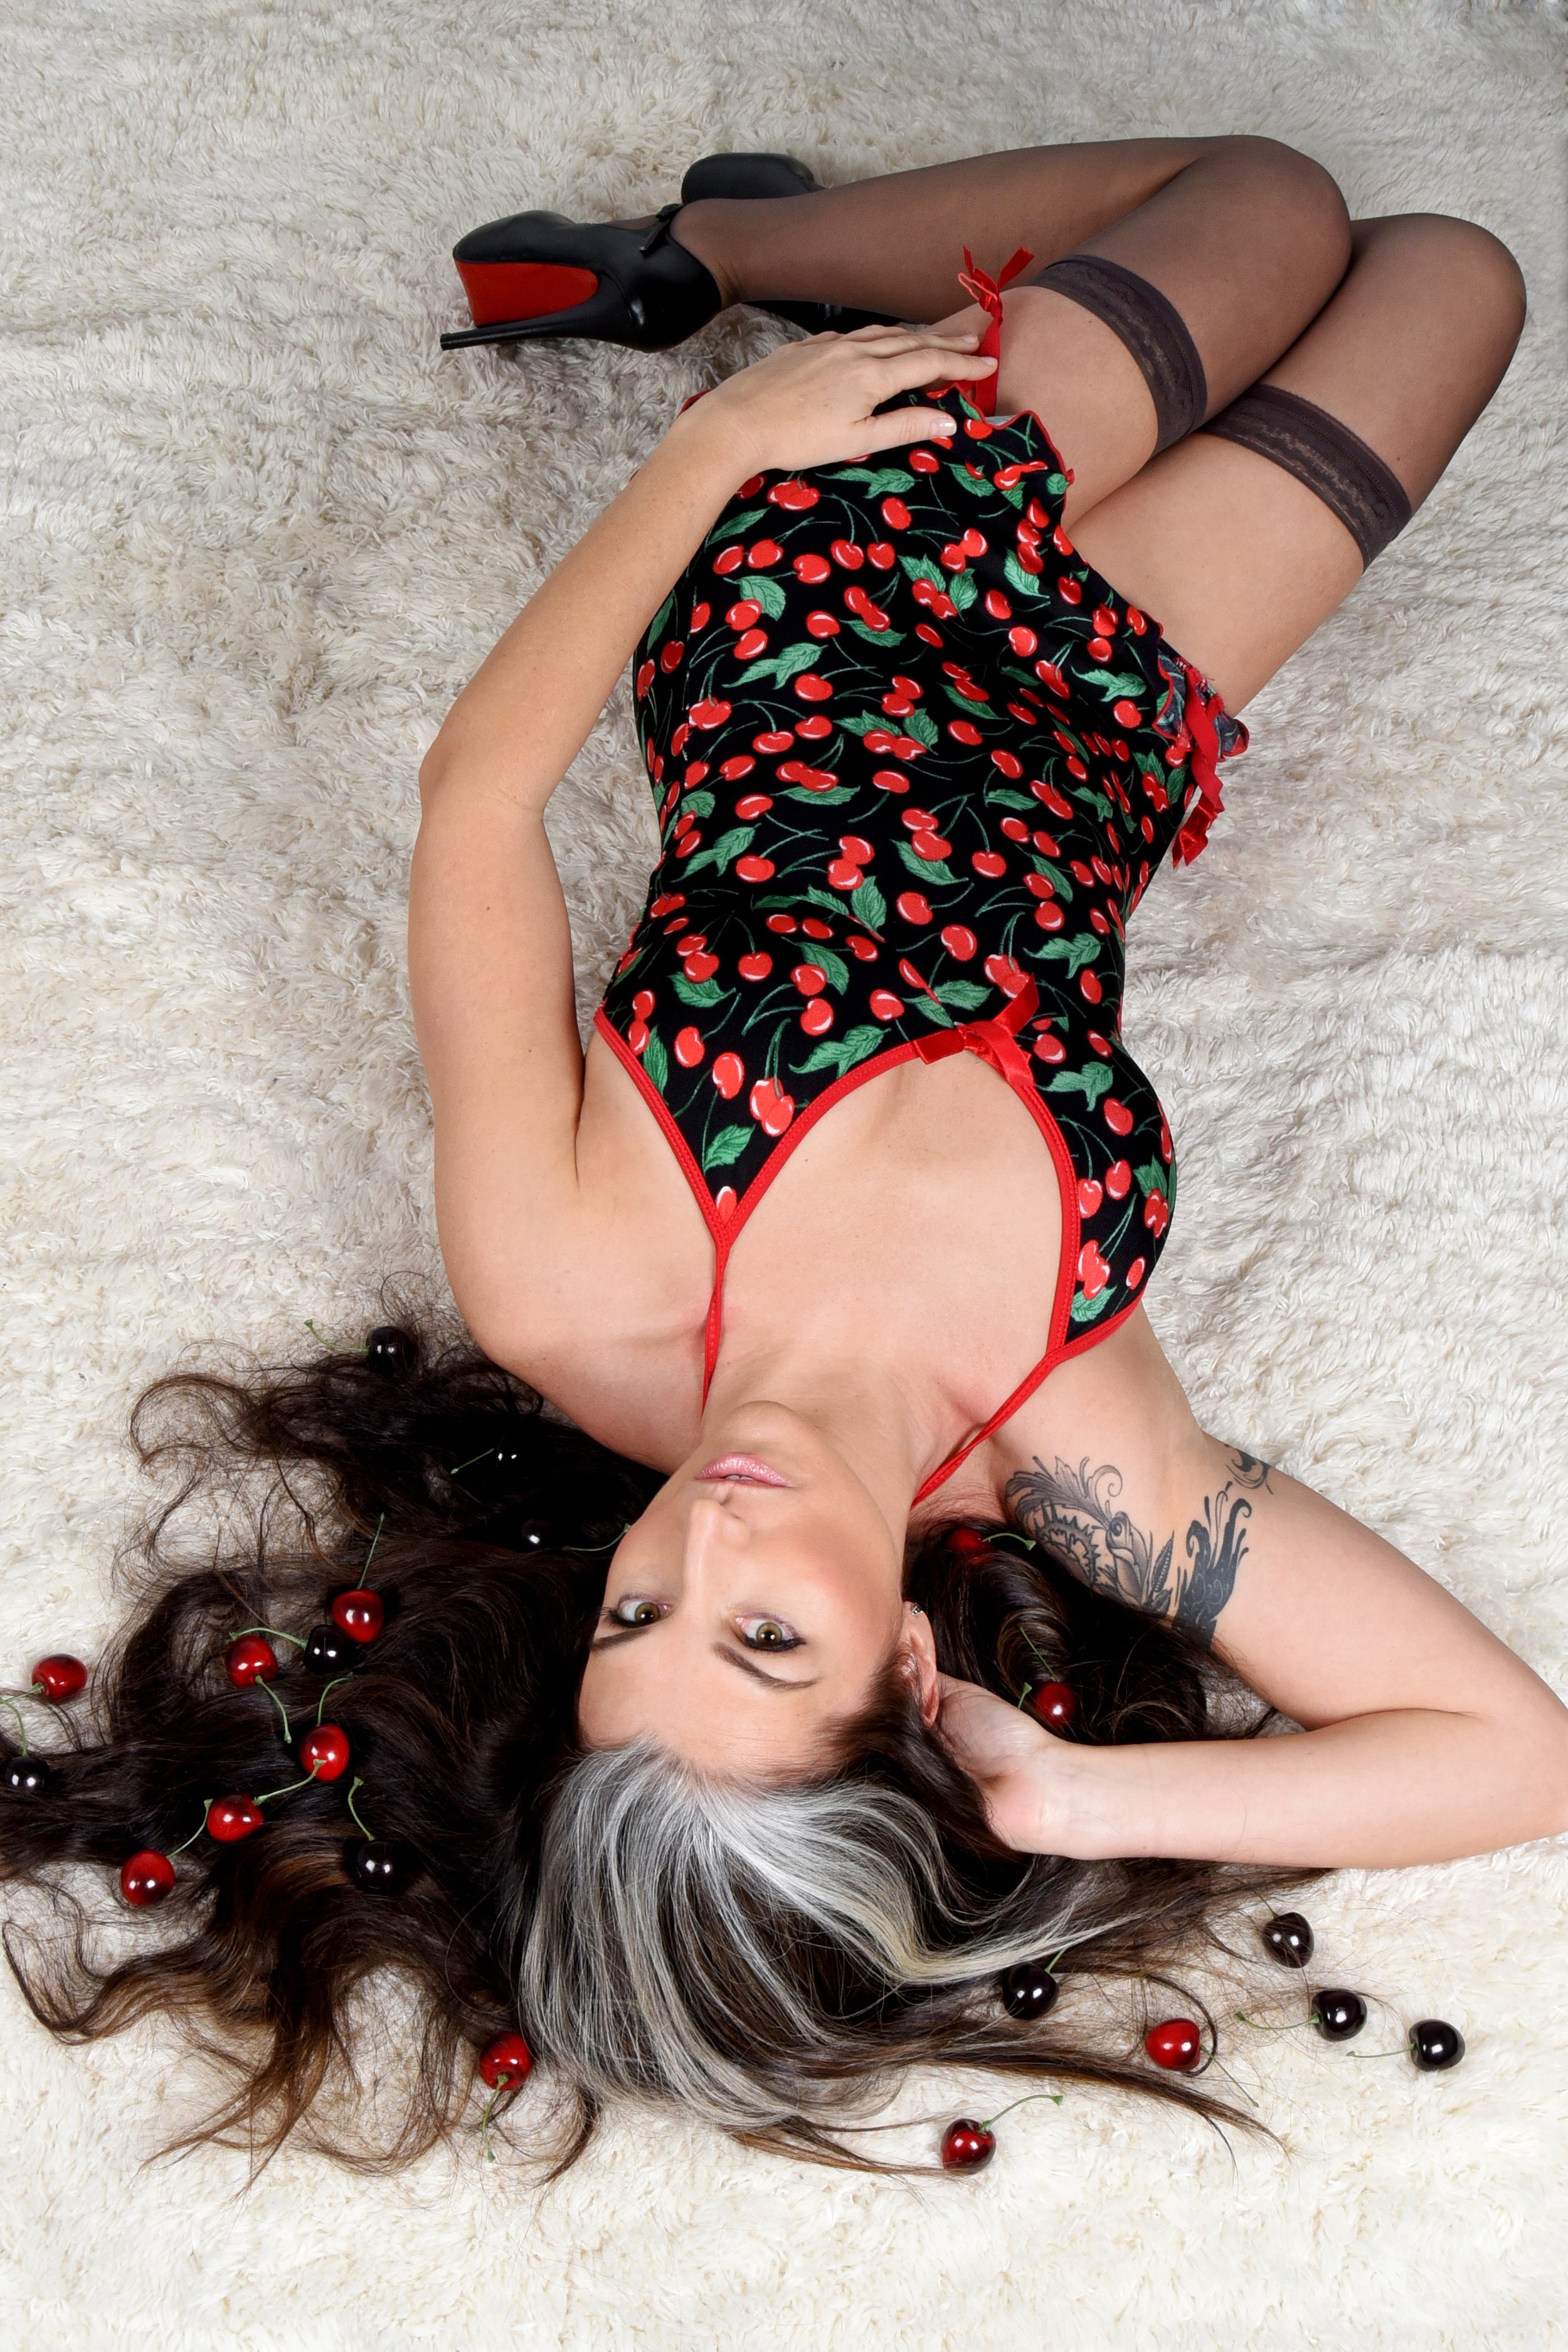 pinup photography